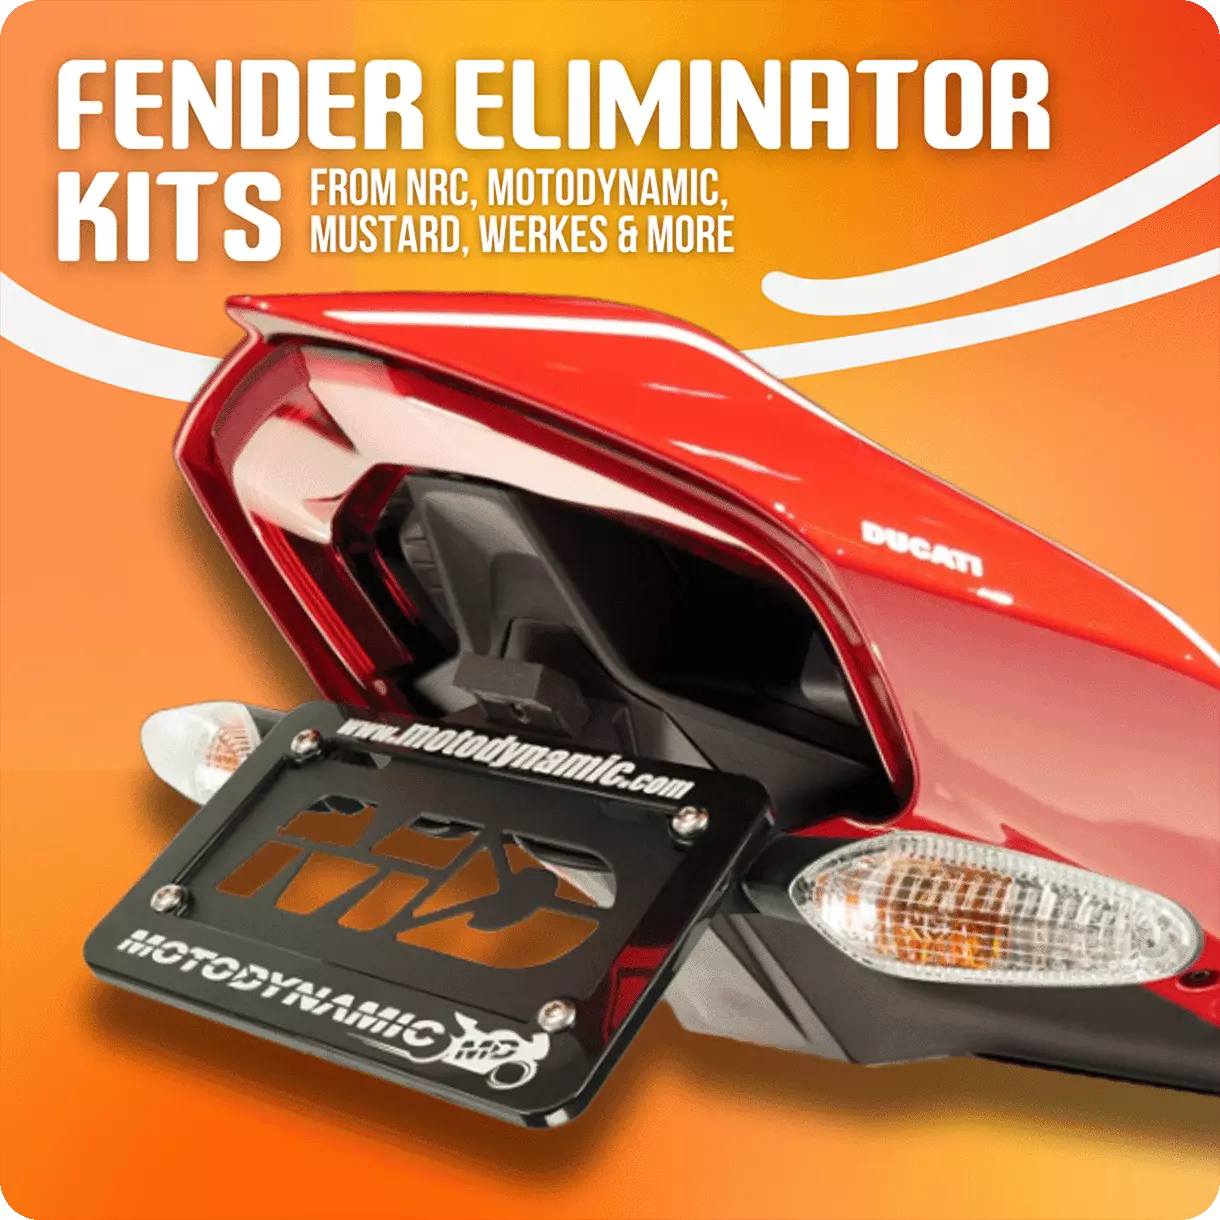 Fender Eliminators and Tail Tidy Kits from Motodynamic, Mustard, NRC and more